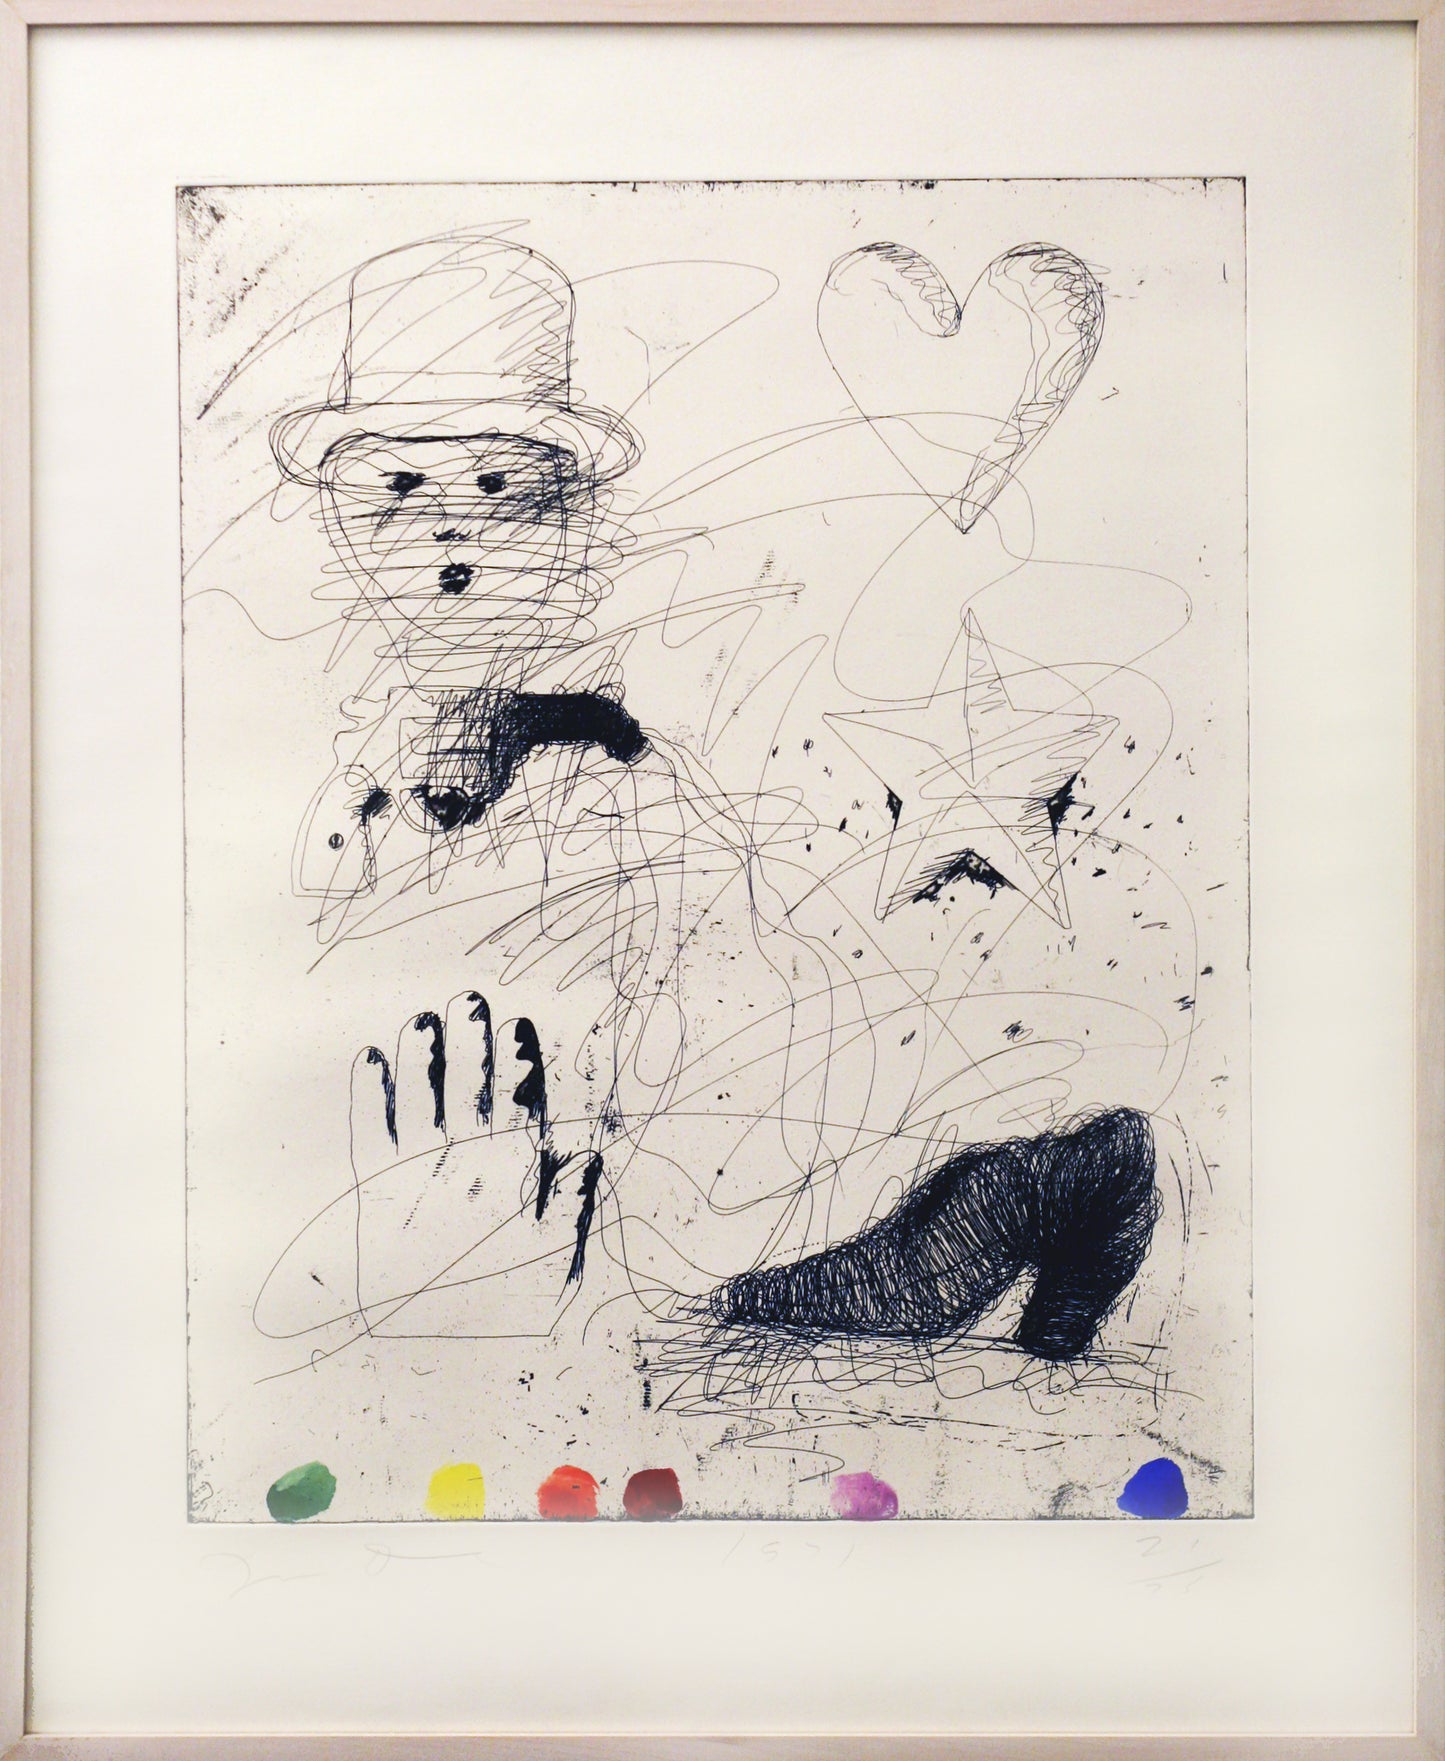 Jim Dine - "The realistic poet assassinated"